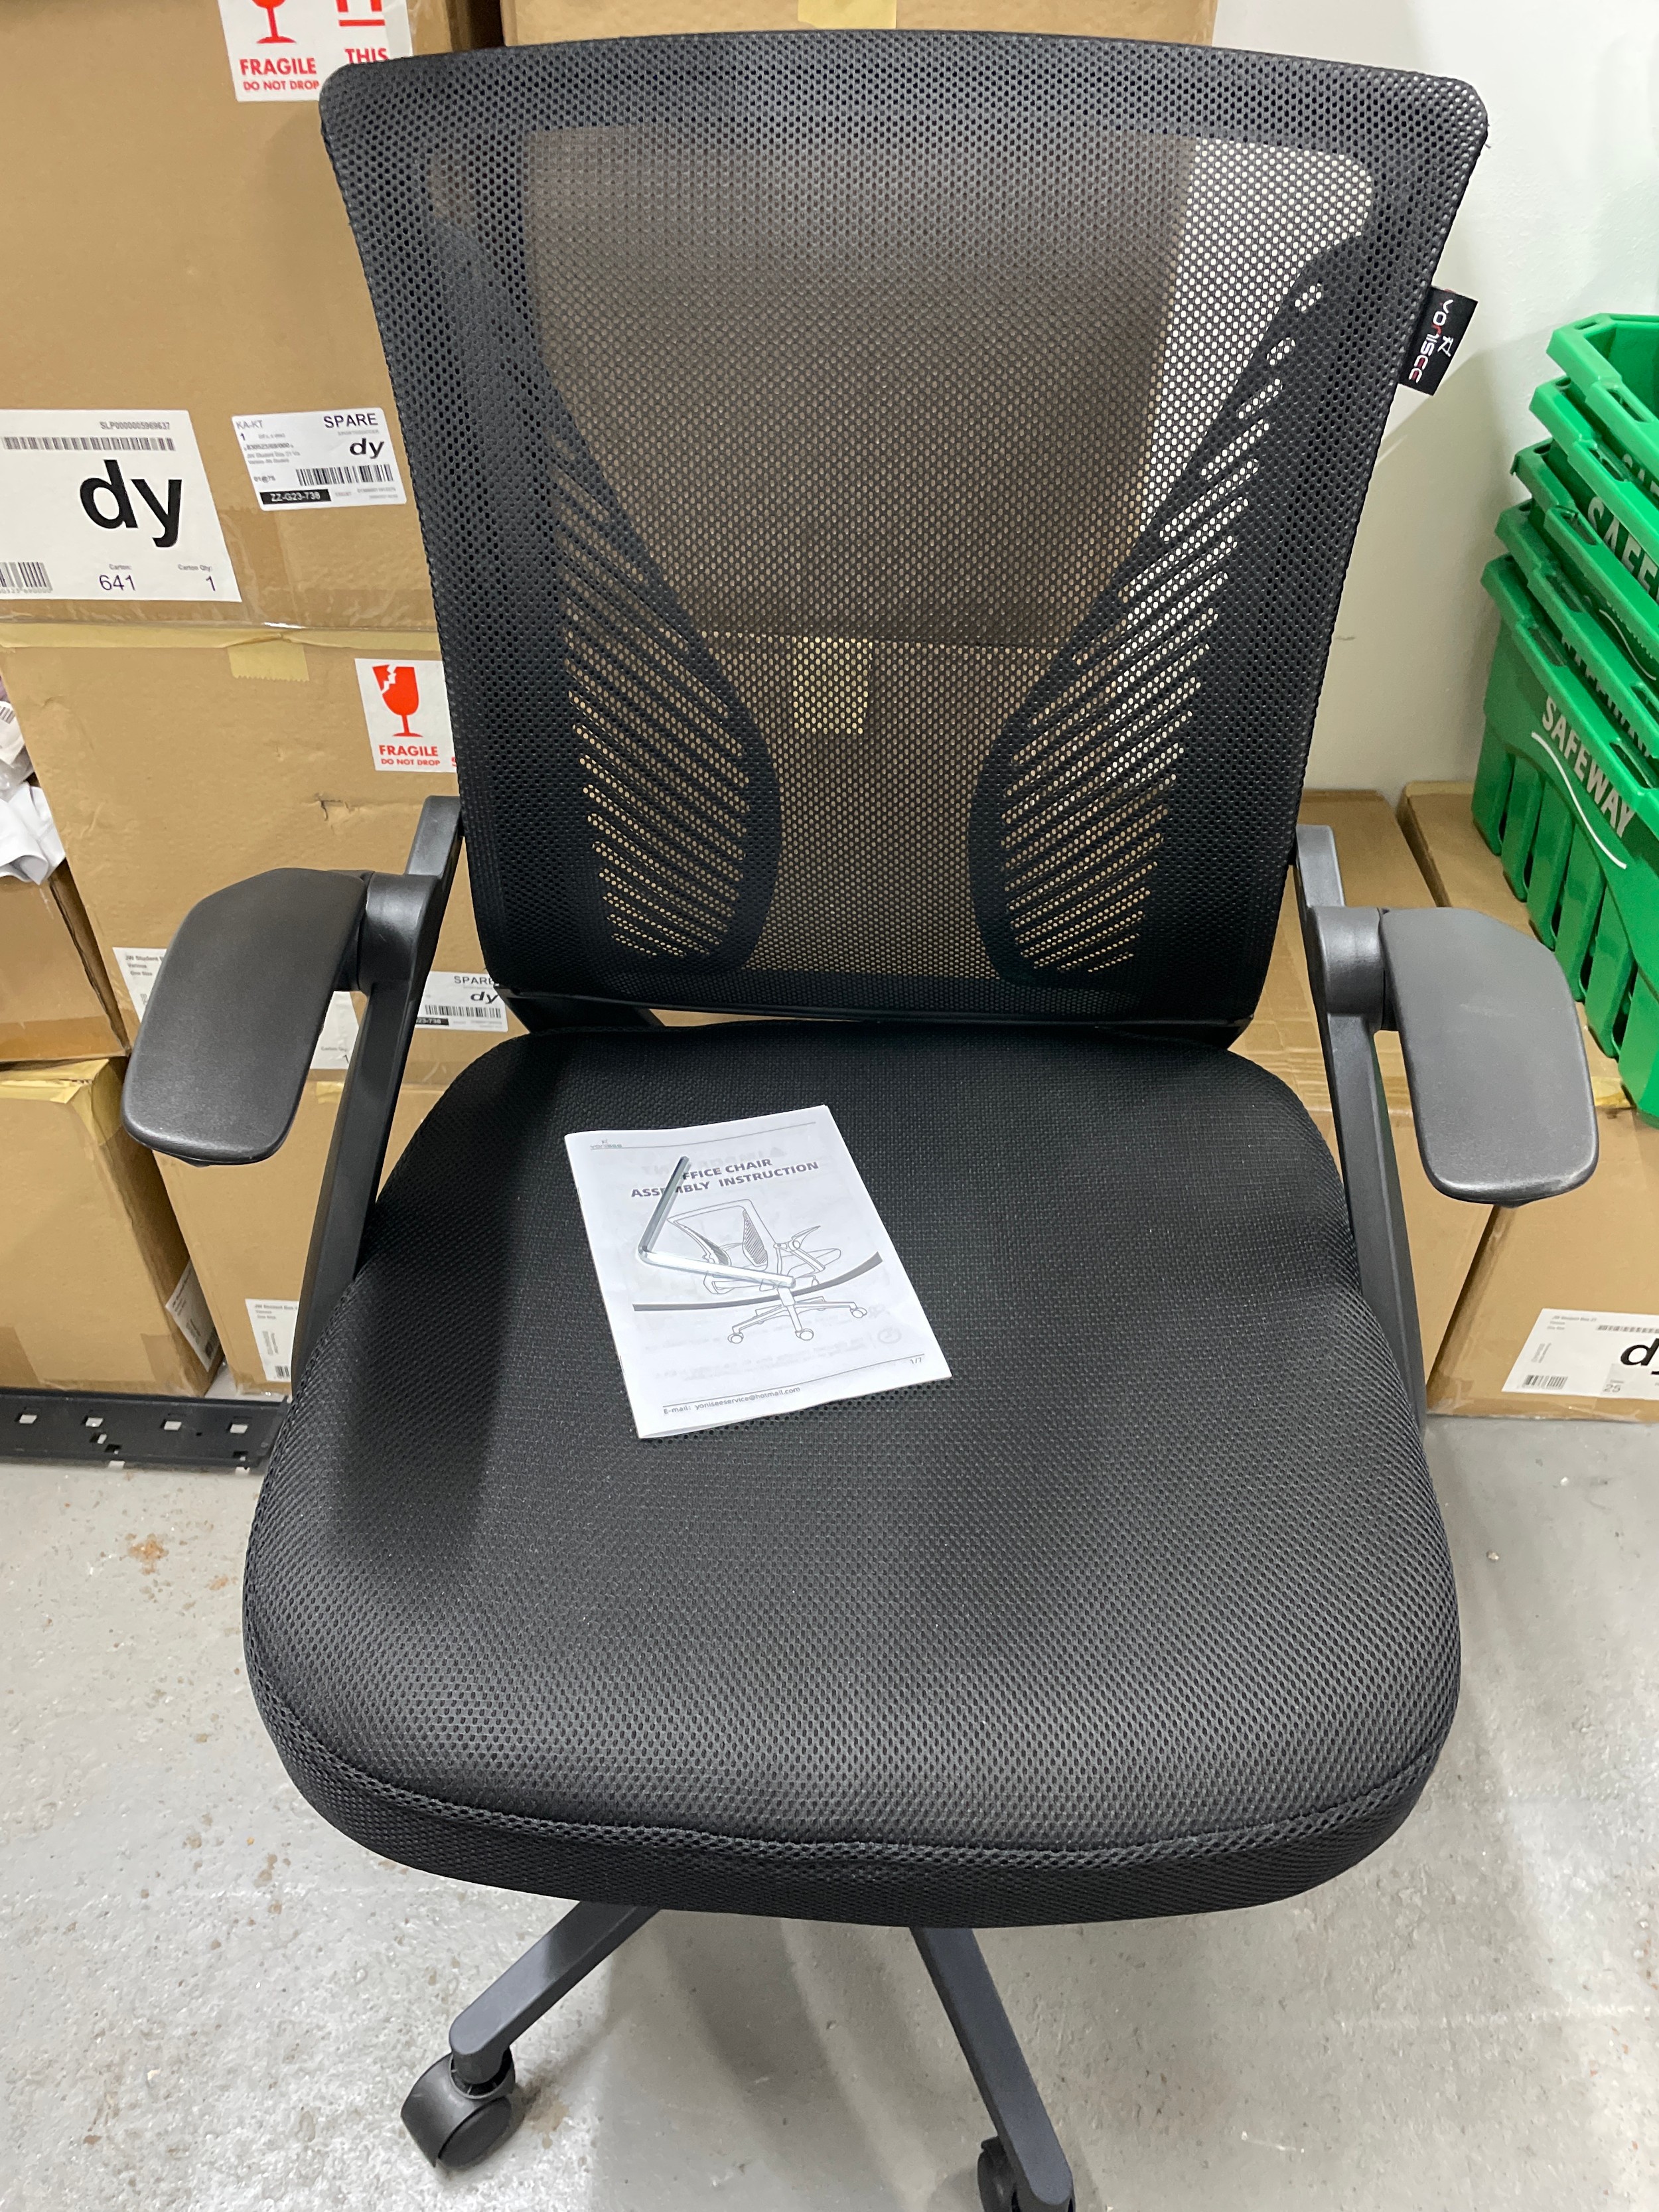 Yonisee Brand New Adjustable Office Chair